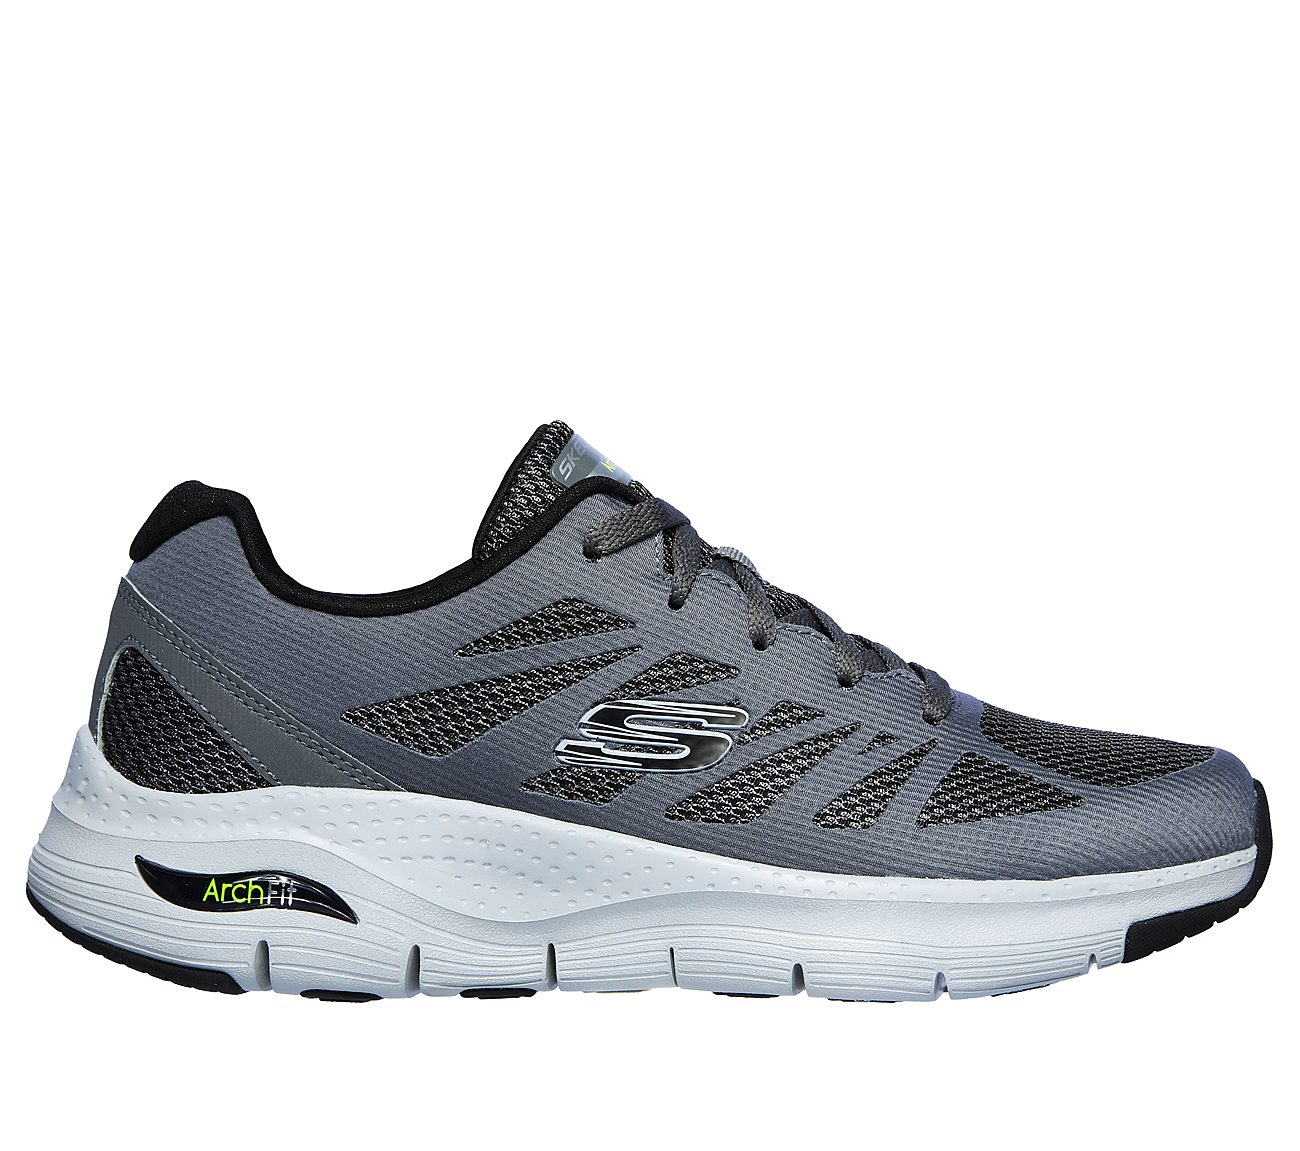 ARCH FIT - CHARGE BACK, CHARCOAL/BLACK Footwear Lateral View